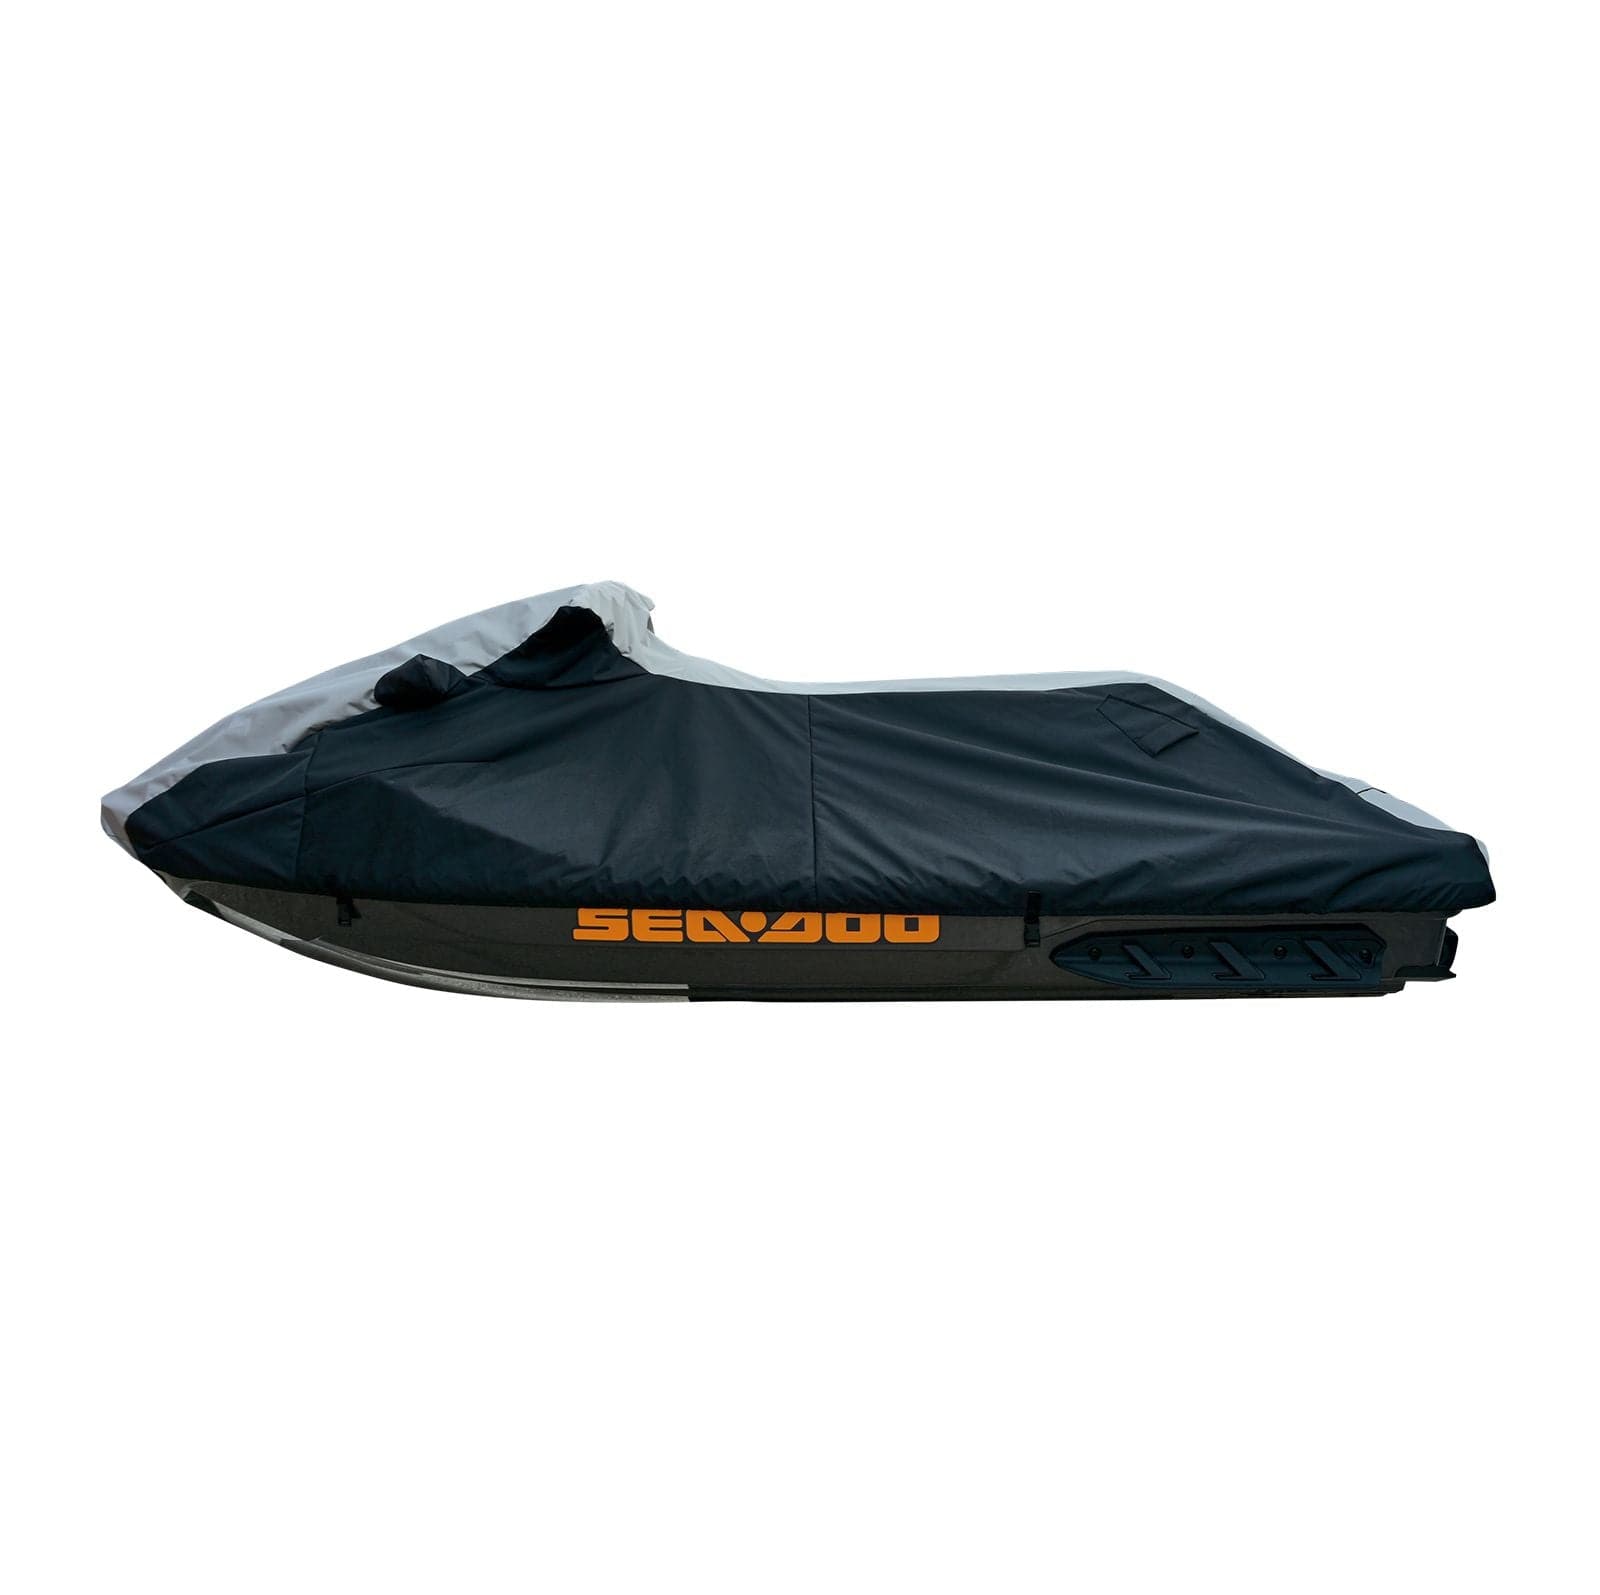 Trailerable Storage cover with vents for Sea-Doo 2006-2011 GTI 130, GTI SE 130/155 / 2009 Wake 155